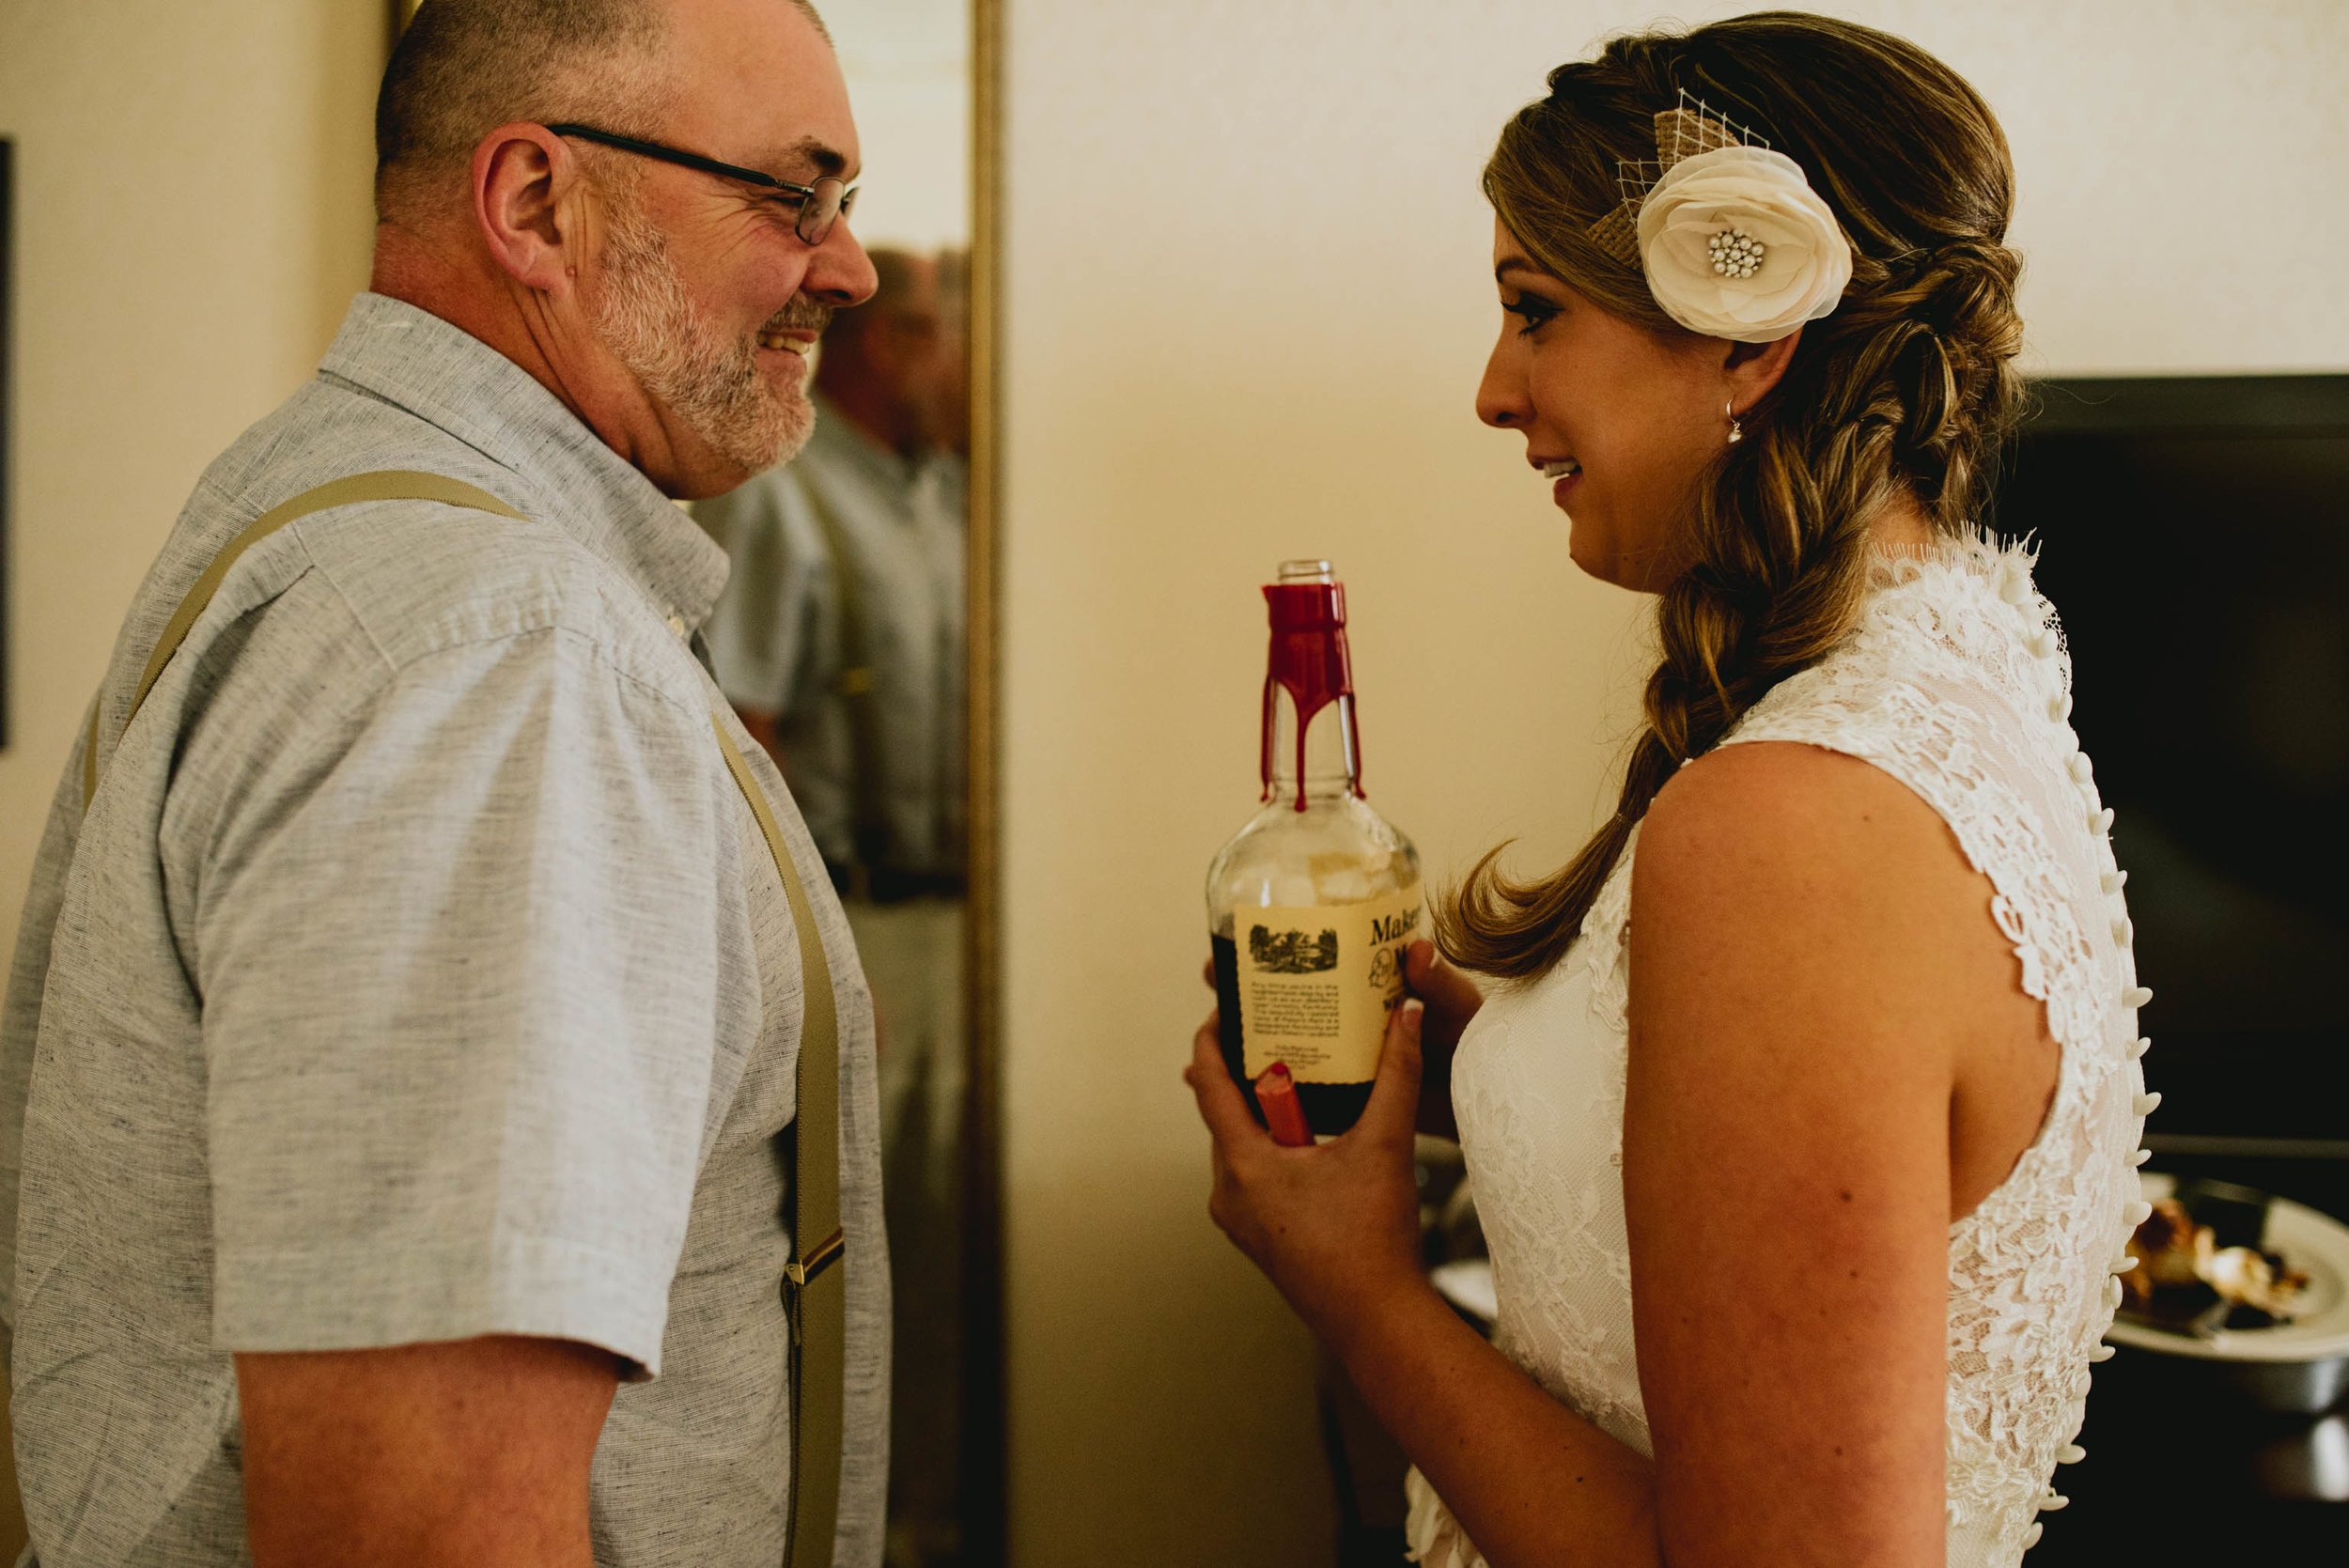 bride suggesting a celebratory shot of whiskey with her dad